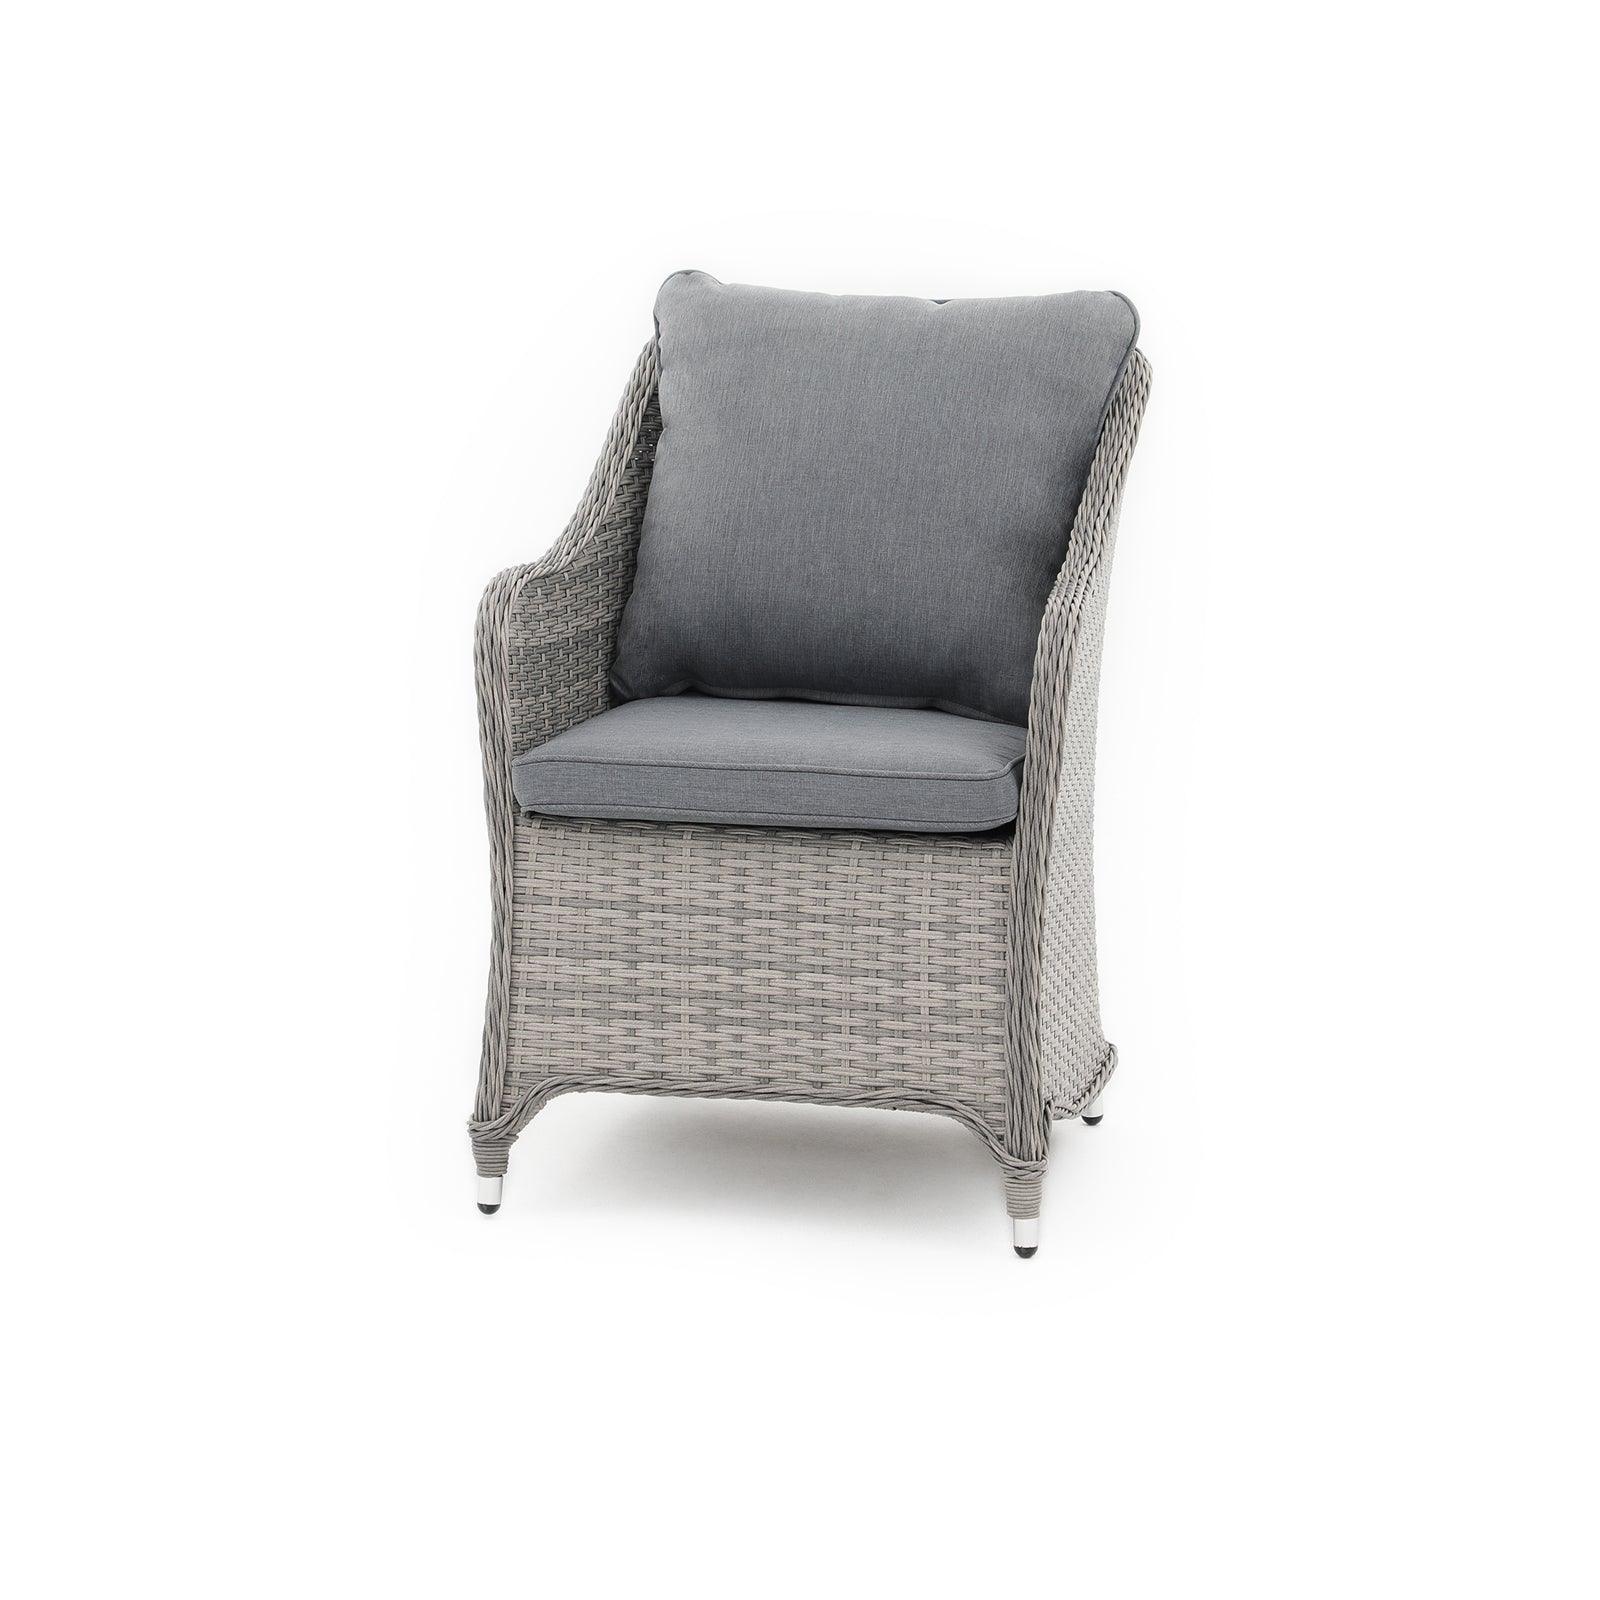 Irati grey wicker outdoor dining chair with aluminum frame, grey cushions, left - Jardina Furniture#color_Grey